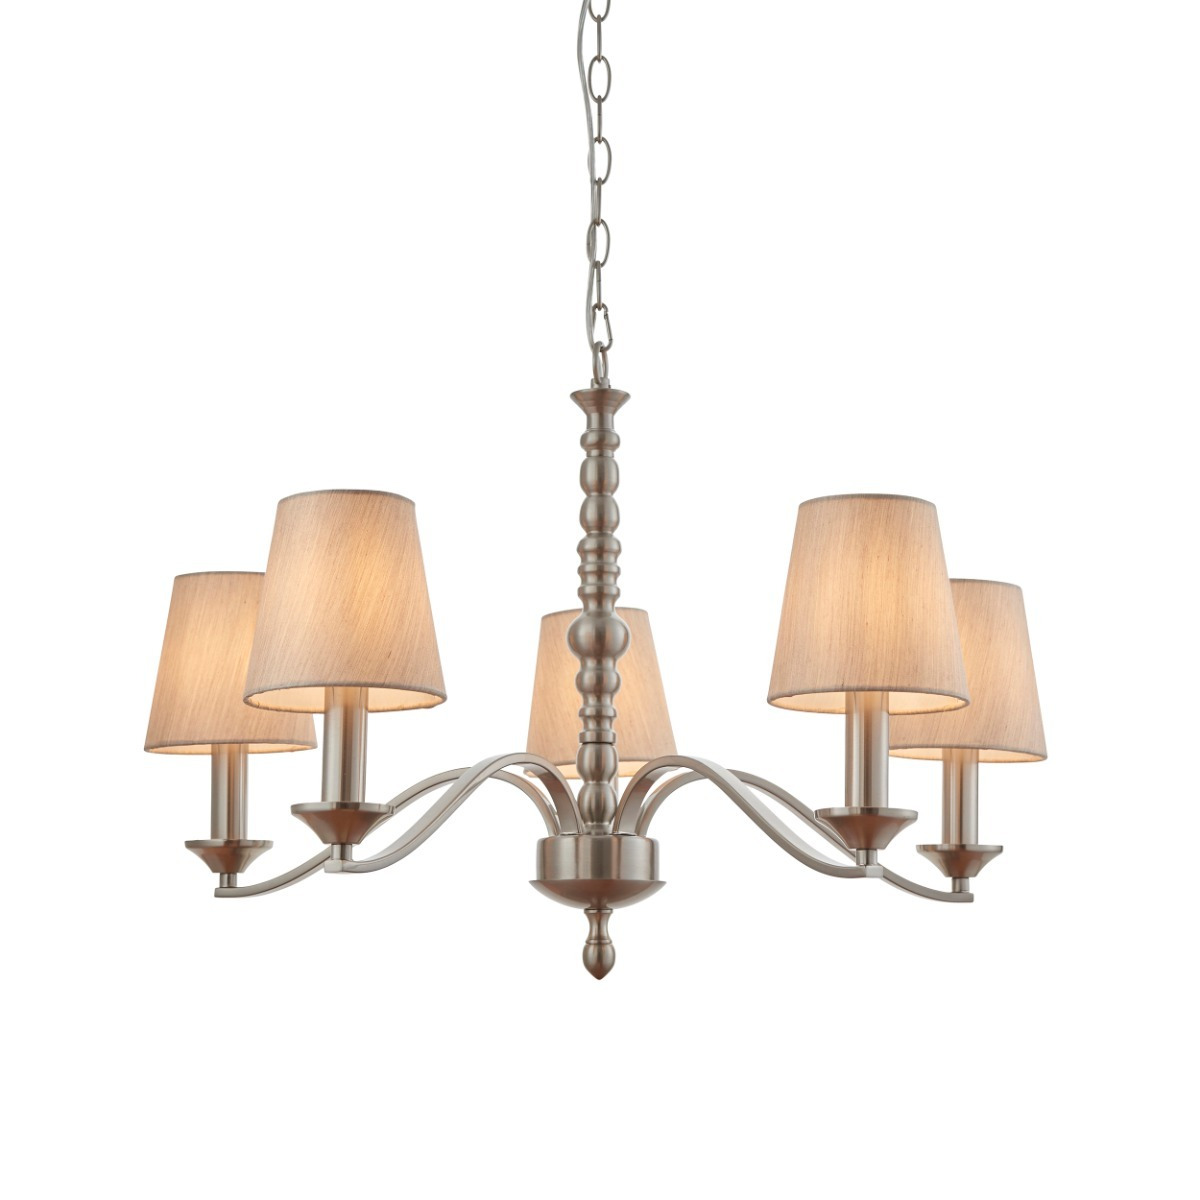 Endon ASTAIRE-5SN Astaire Large Ceiling Pendant Light in Satin Nickel Finish